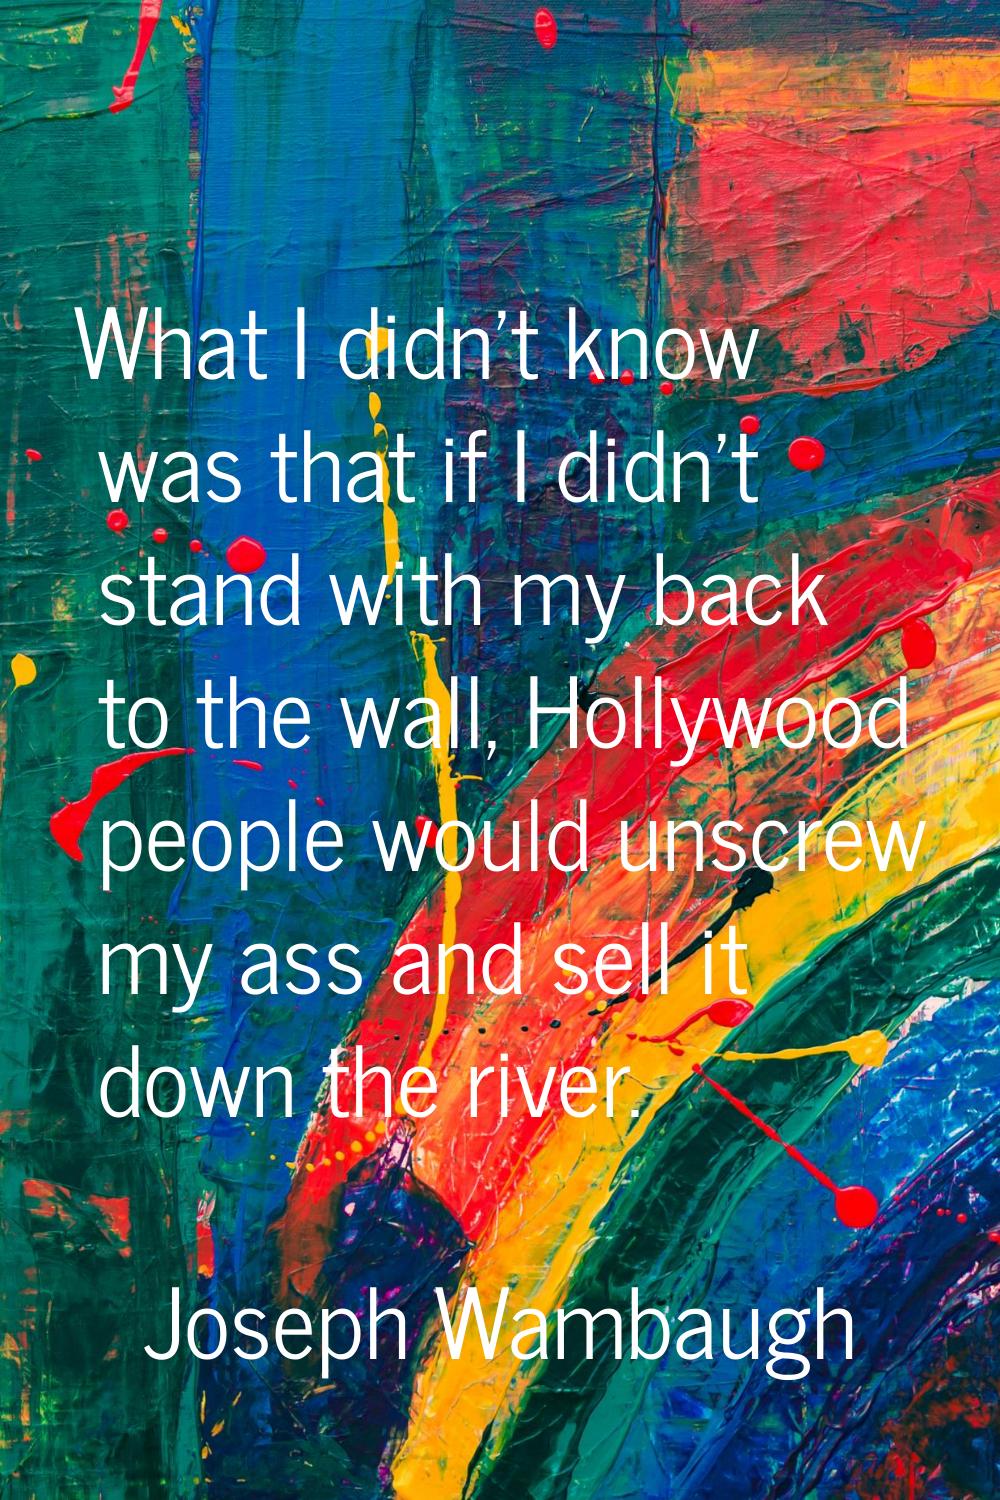 What I didn't know was that if I didn't stand with my back to the wall, Hollywood people would unsc